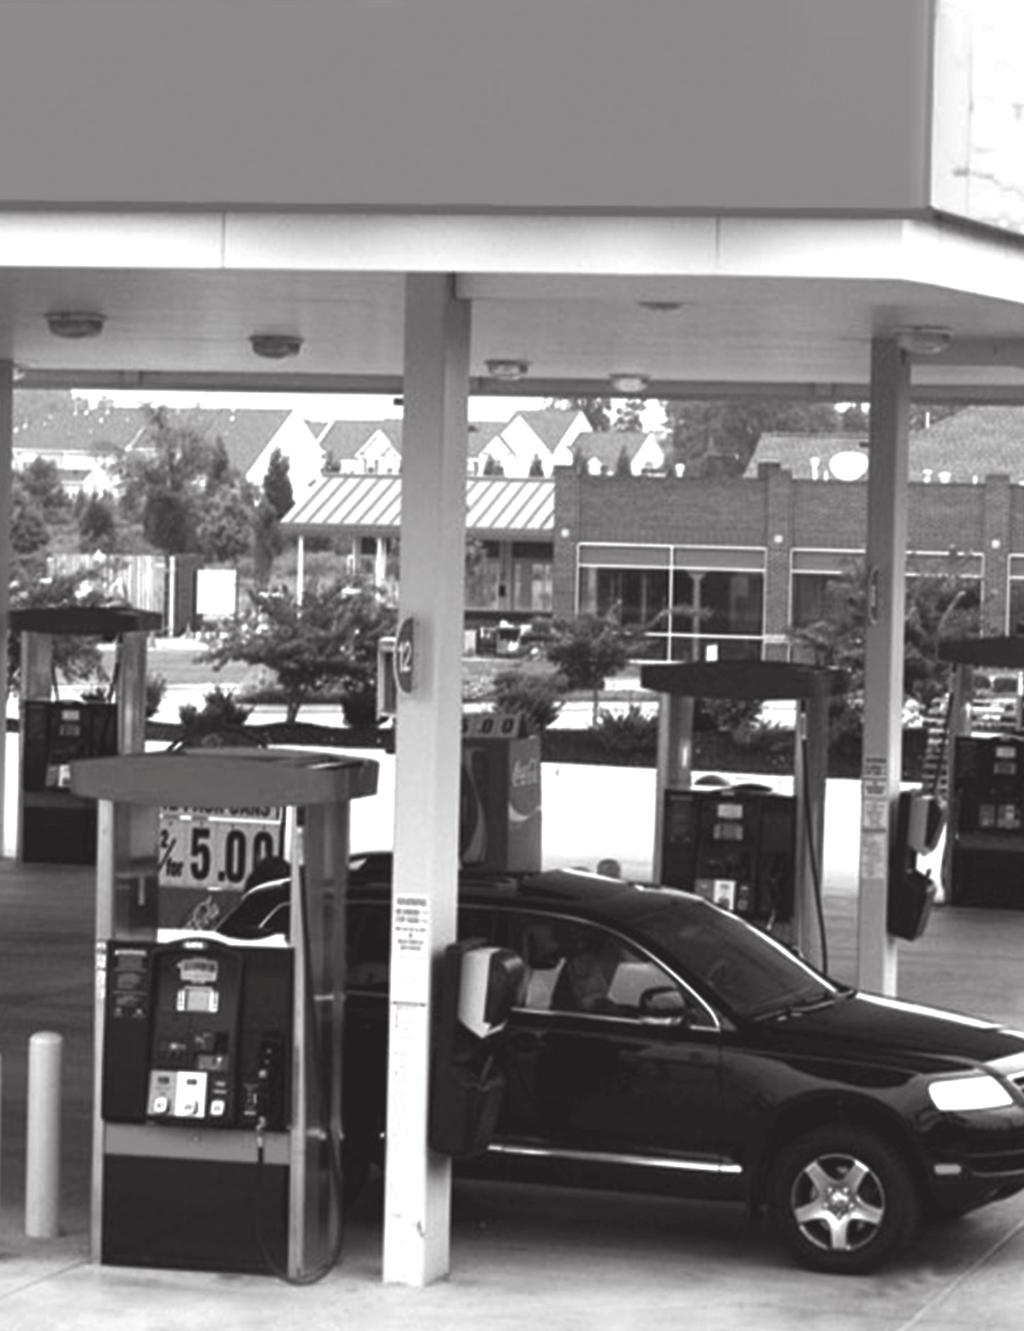 Lasting Performance Enhancing your customers forecourt experience. Why Horizon?